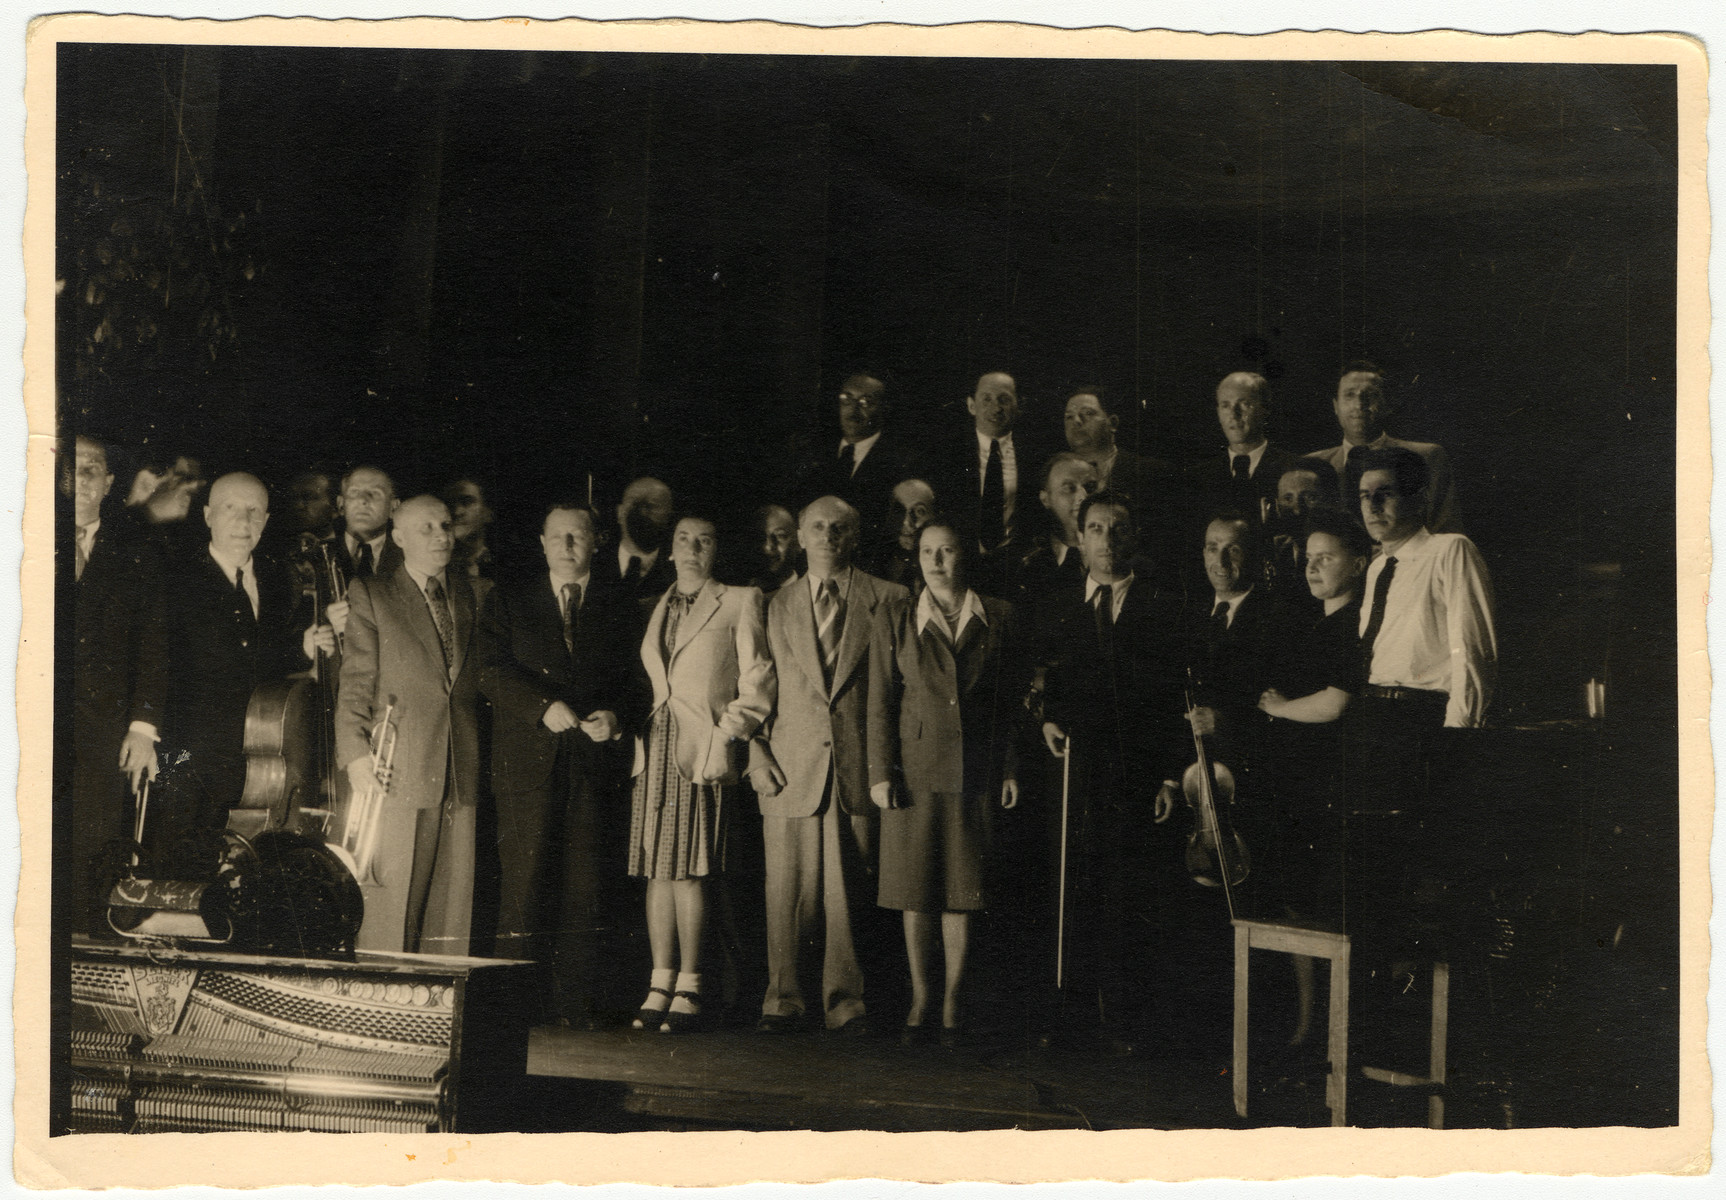 Performance of the Ex-Concentration Camp Orchestra conducted by Leonard Bernstein.

[Bernstein conducted two concerts the same day - -a matinee in Feldafing followed by an evening concert in Landsberg.  It is unclear in which camp this photo was taken.]

Pictured are Leonard Bernstein (far right), Fania Durmashkin (to his left), Max Beker (fourth from the right) and Henia Durmashkin (seventh from the right).